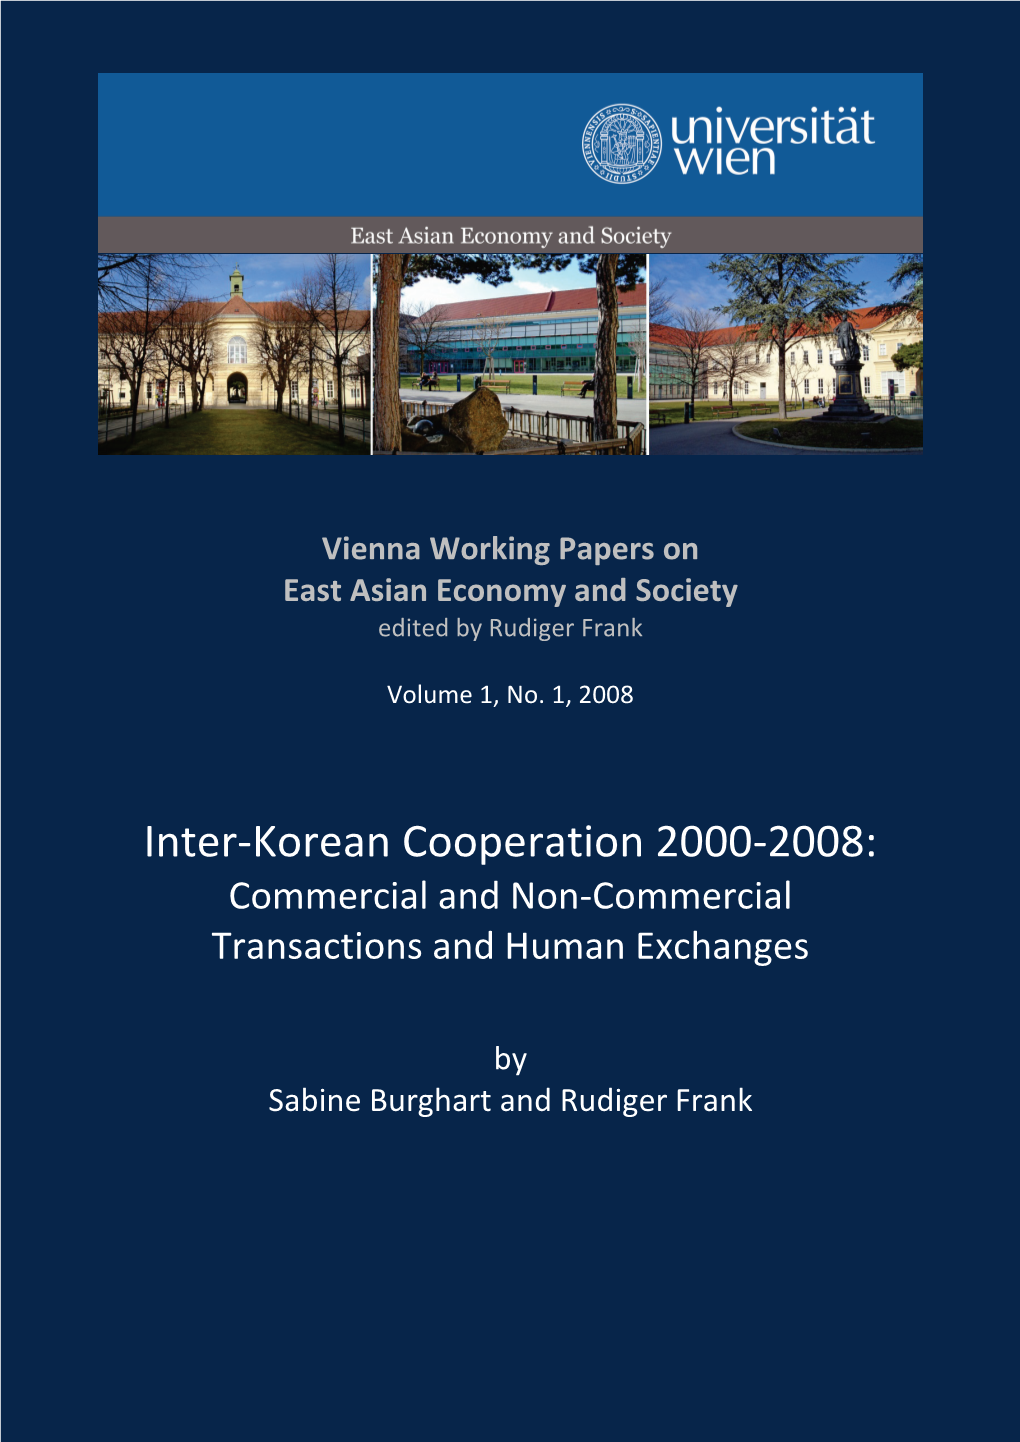 Inter-Korean Cooperation 2000-2008: Commercial and Non-Commercial Transactions and Human Exchanges